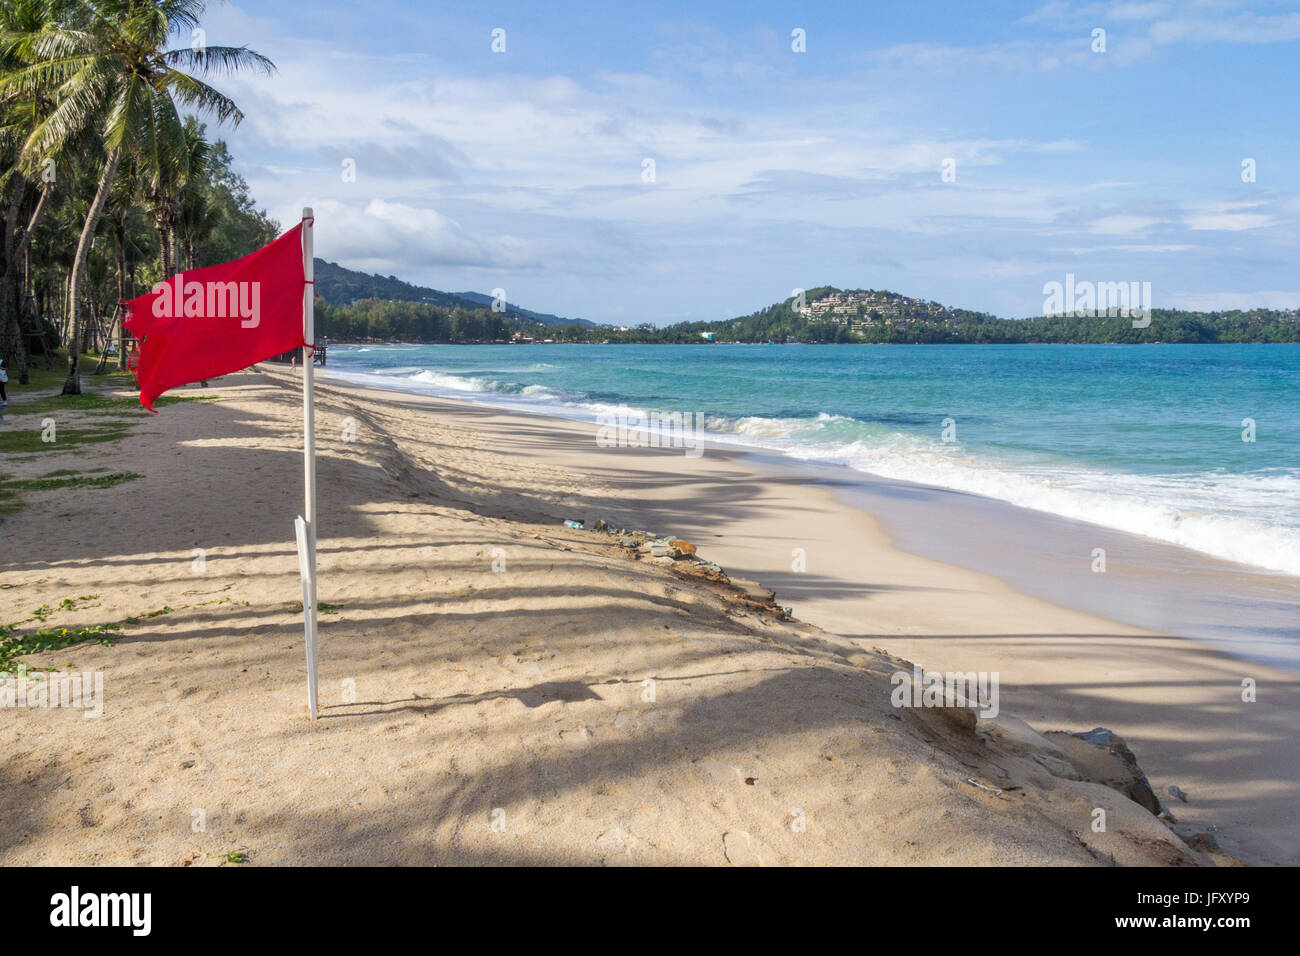 Red flag warning against swimming due to dangerous conditions on Bang Tao beach, Phuket, Thailand Stock Photo